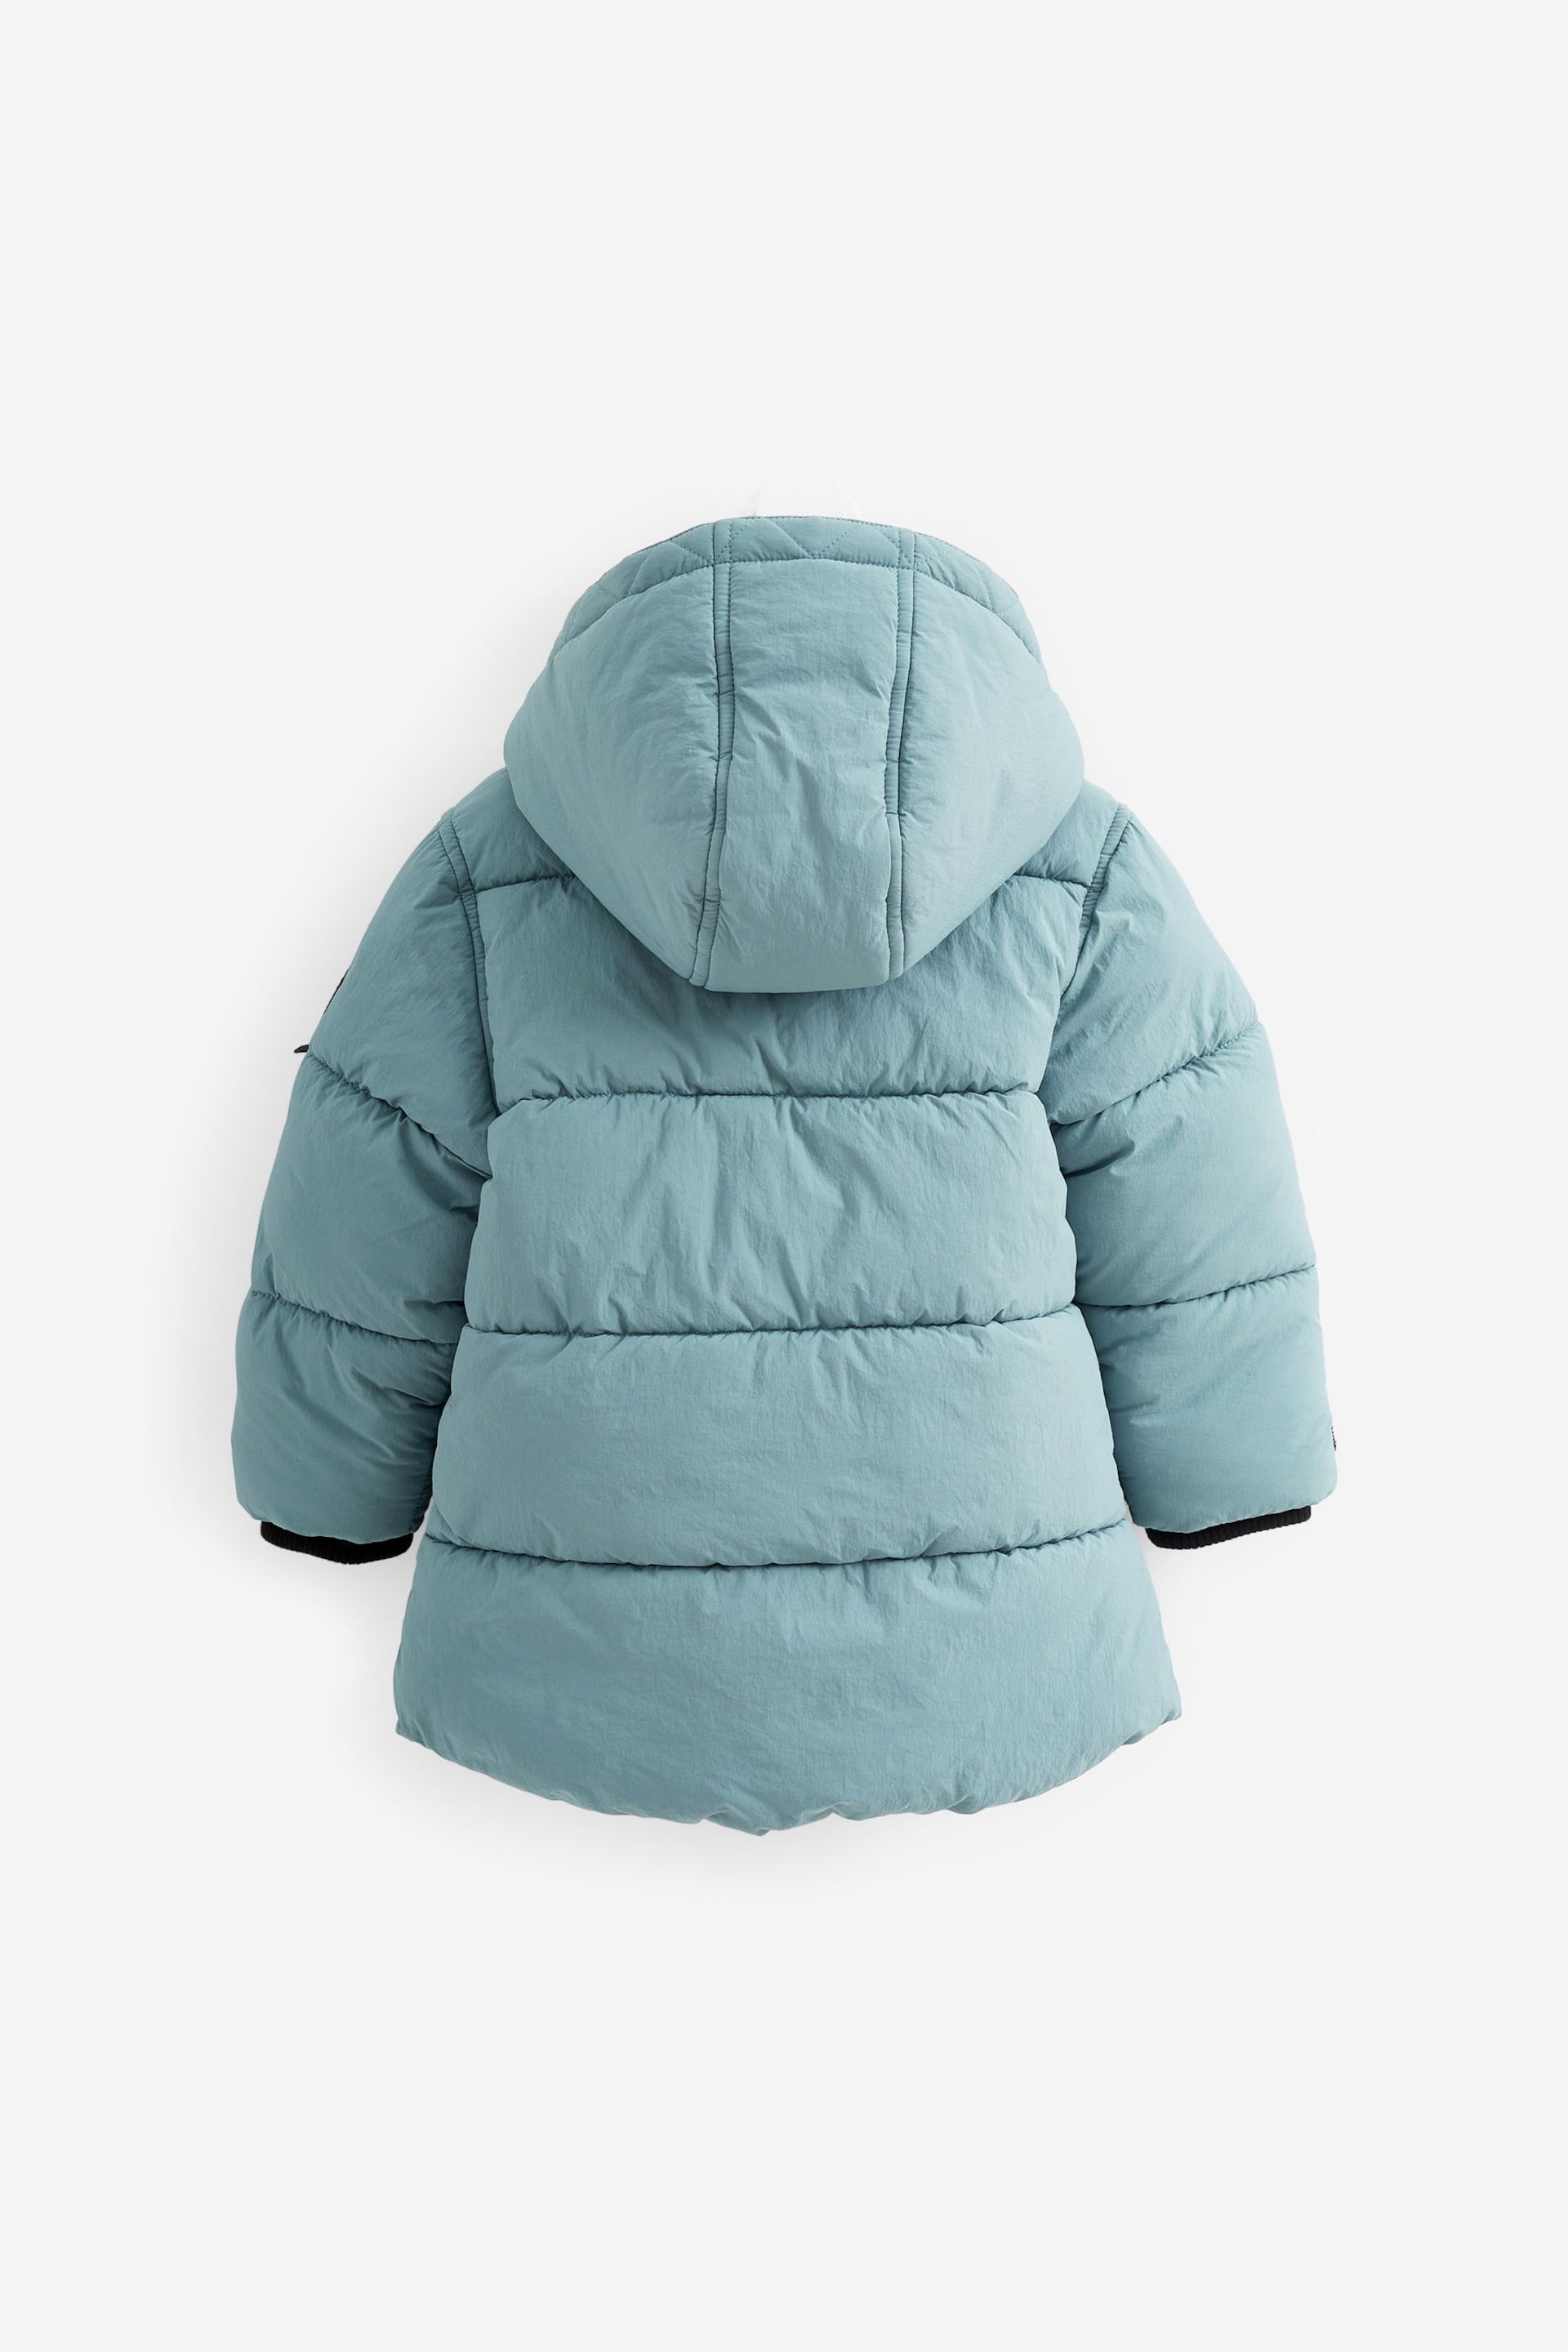 Mineral Blue Borg Teddy Lined Padded Coat (3mths-7yrs) - Image 5 of 8